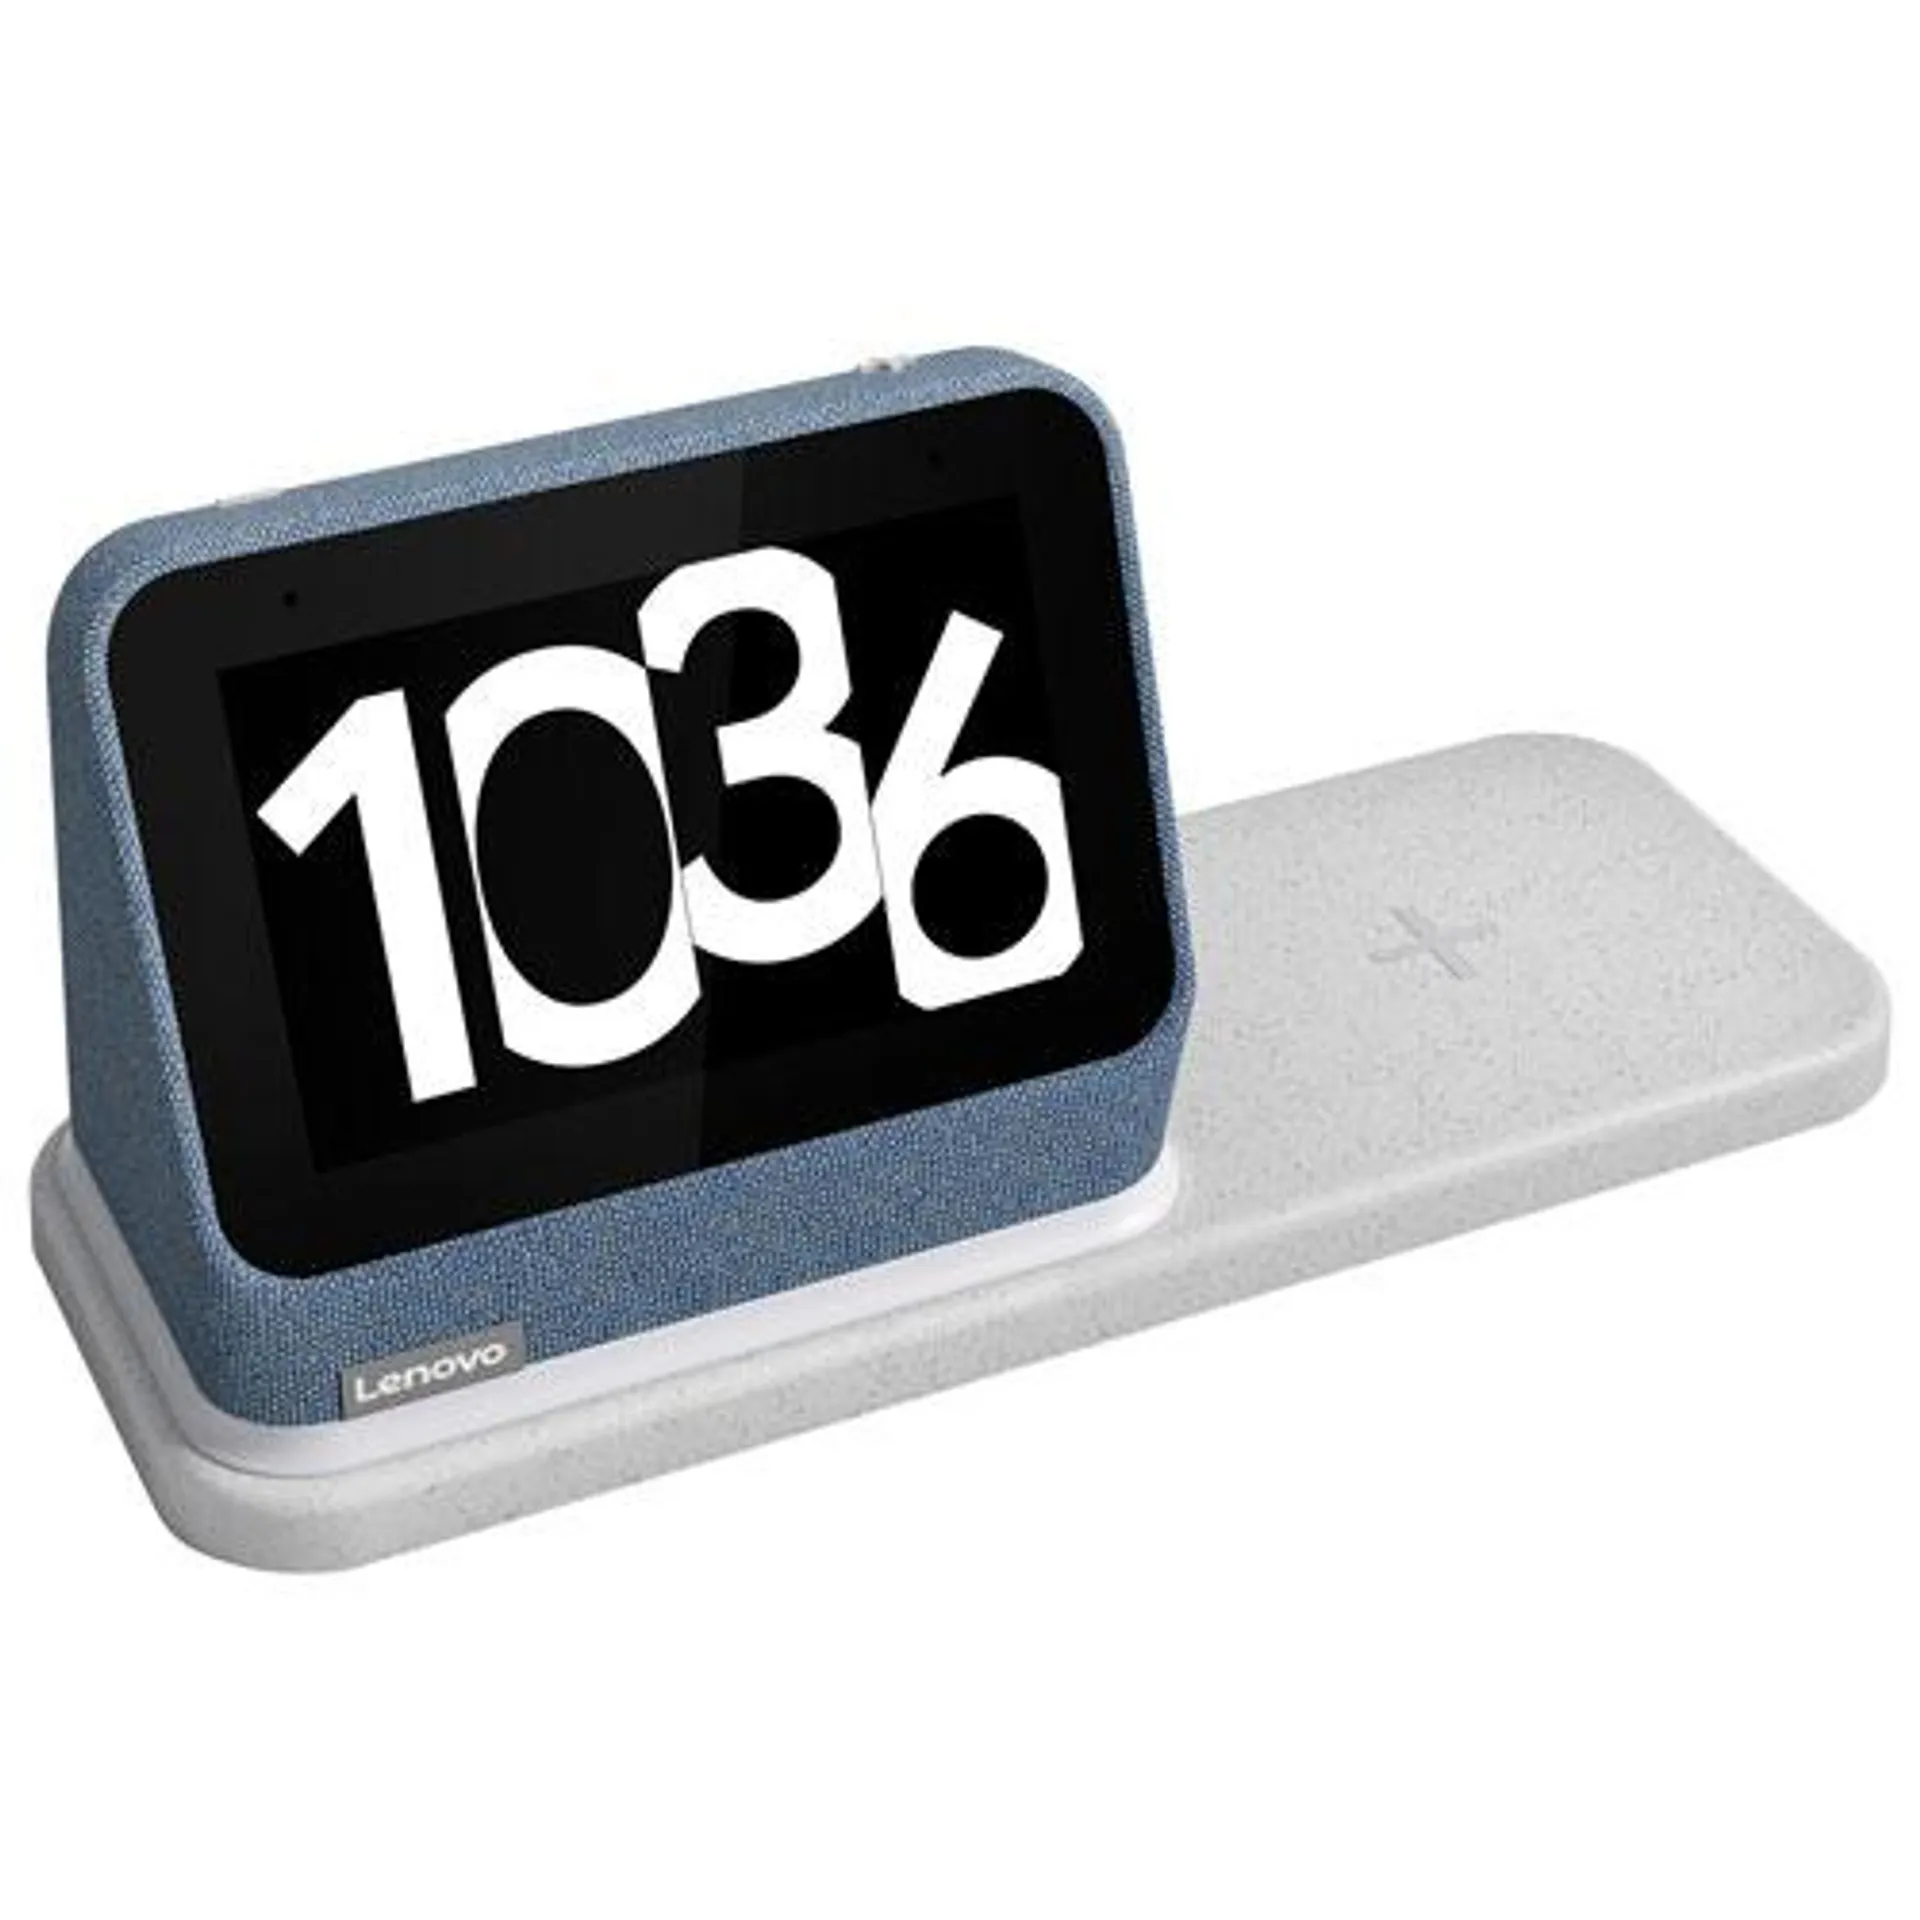 Lenovo Smart Clock 2 with Wireless Charging Dock - Abyss Blue